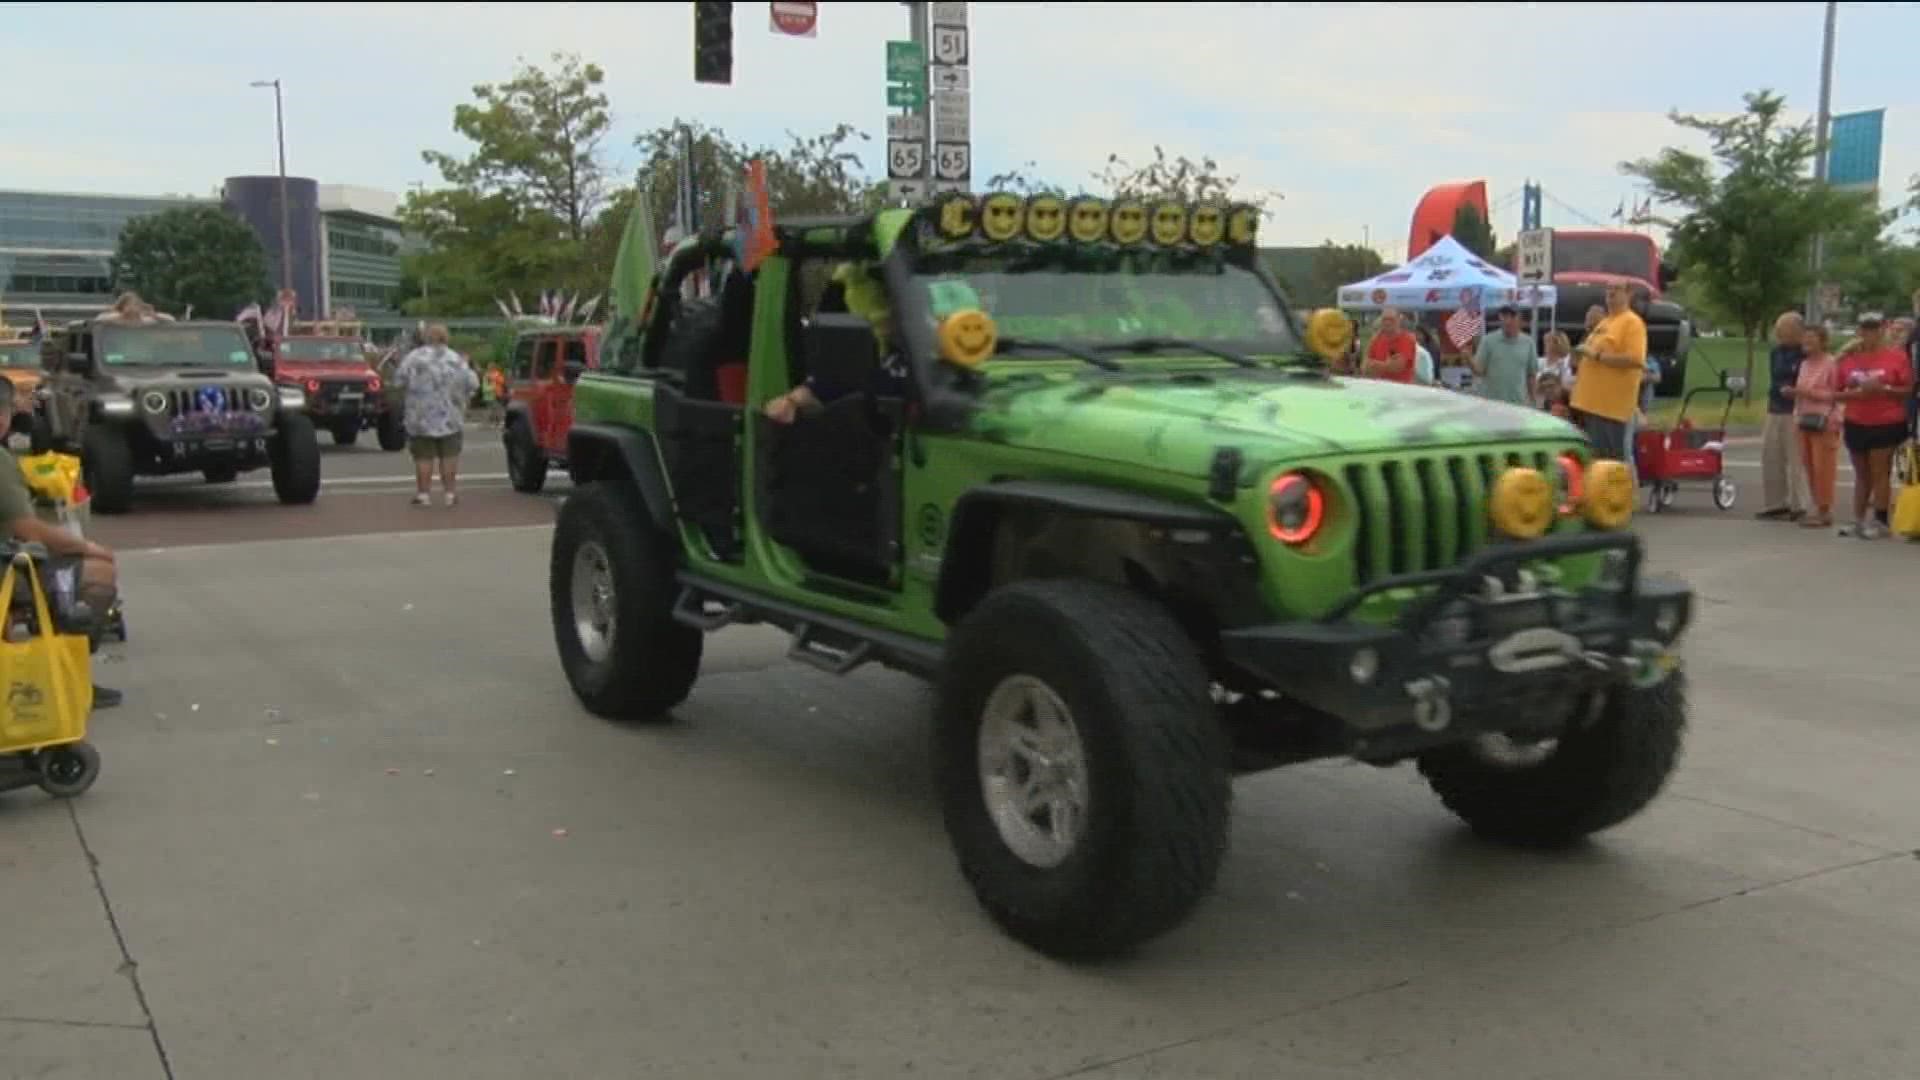 Organizers with Jeep Fest estimate 70,000 came to Toledo for the two-day event, with $5 million generated for the area's economy.